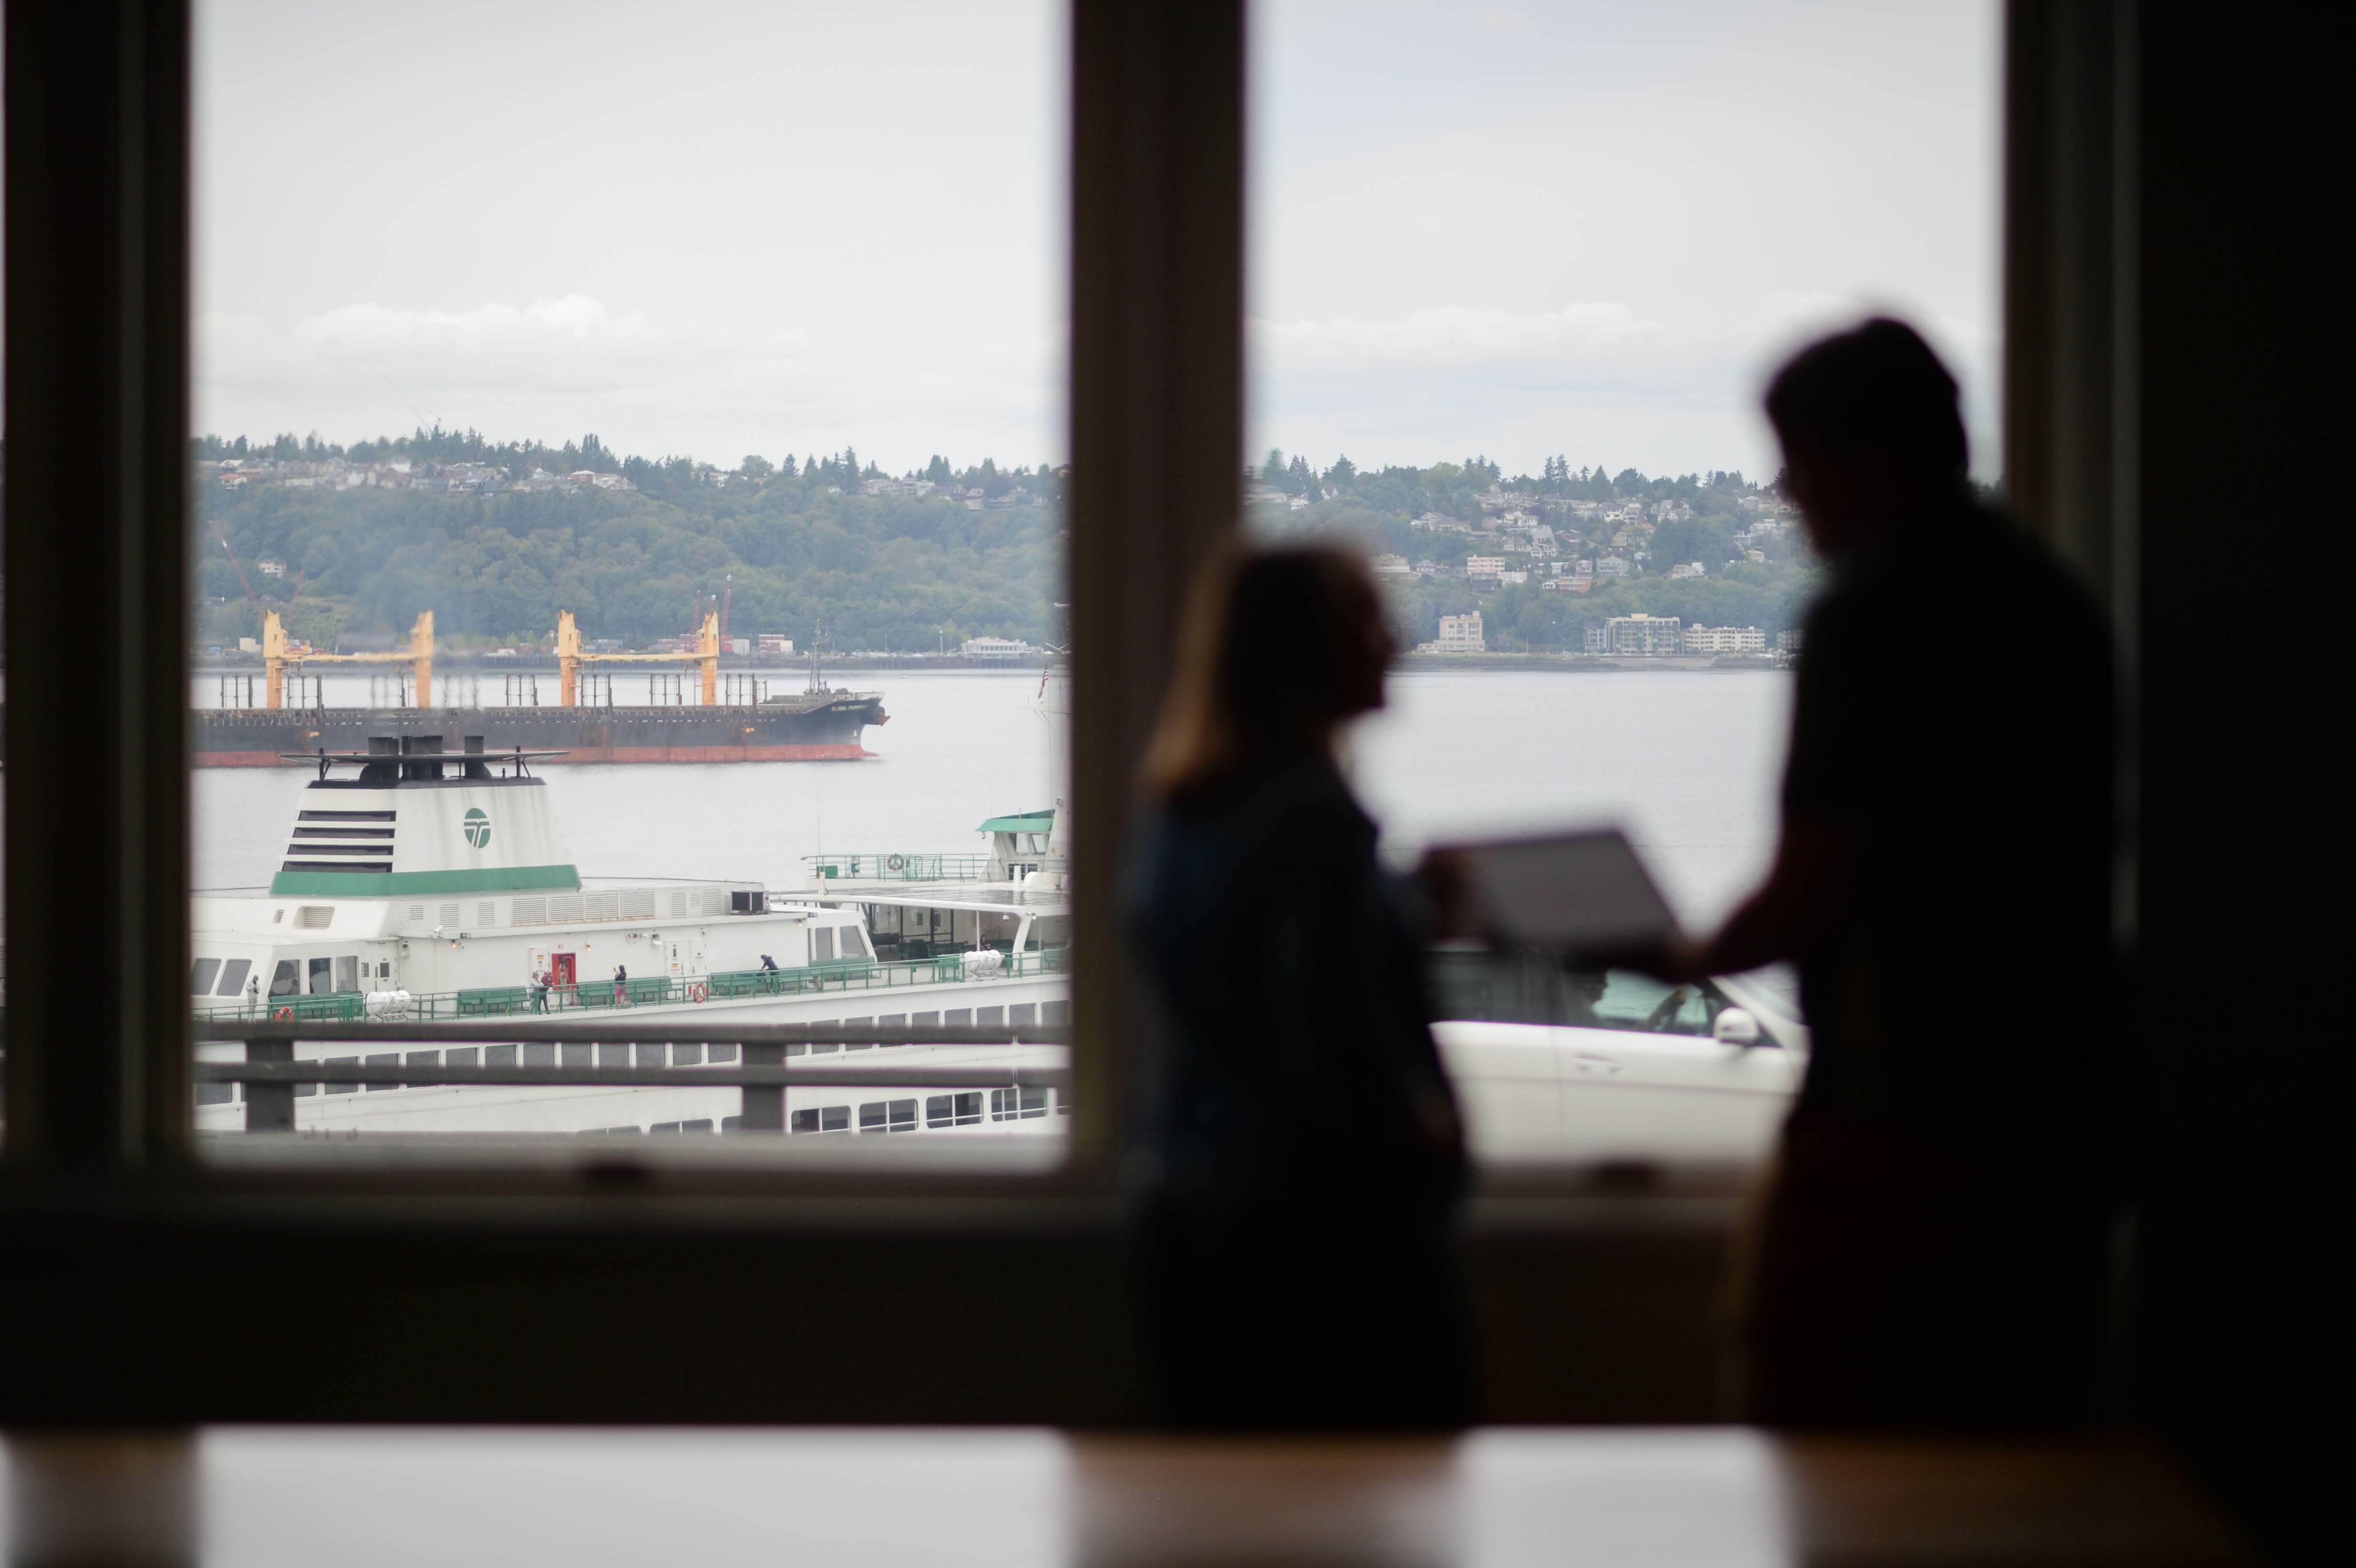 Two coworkers having a discussion in front of a window with a ferry boat in the background